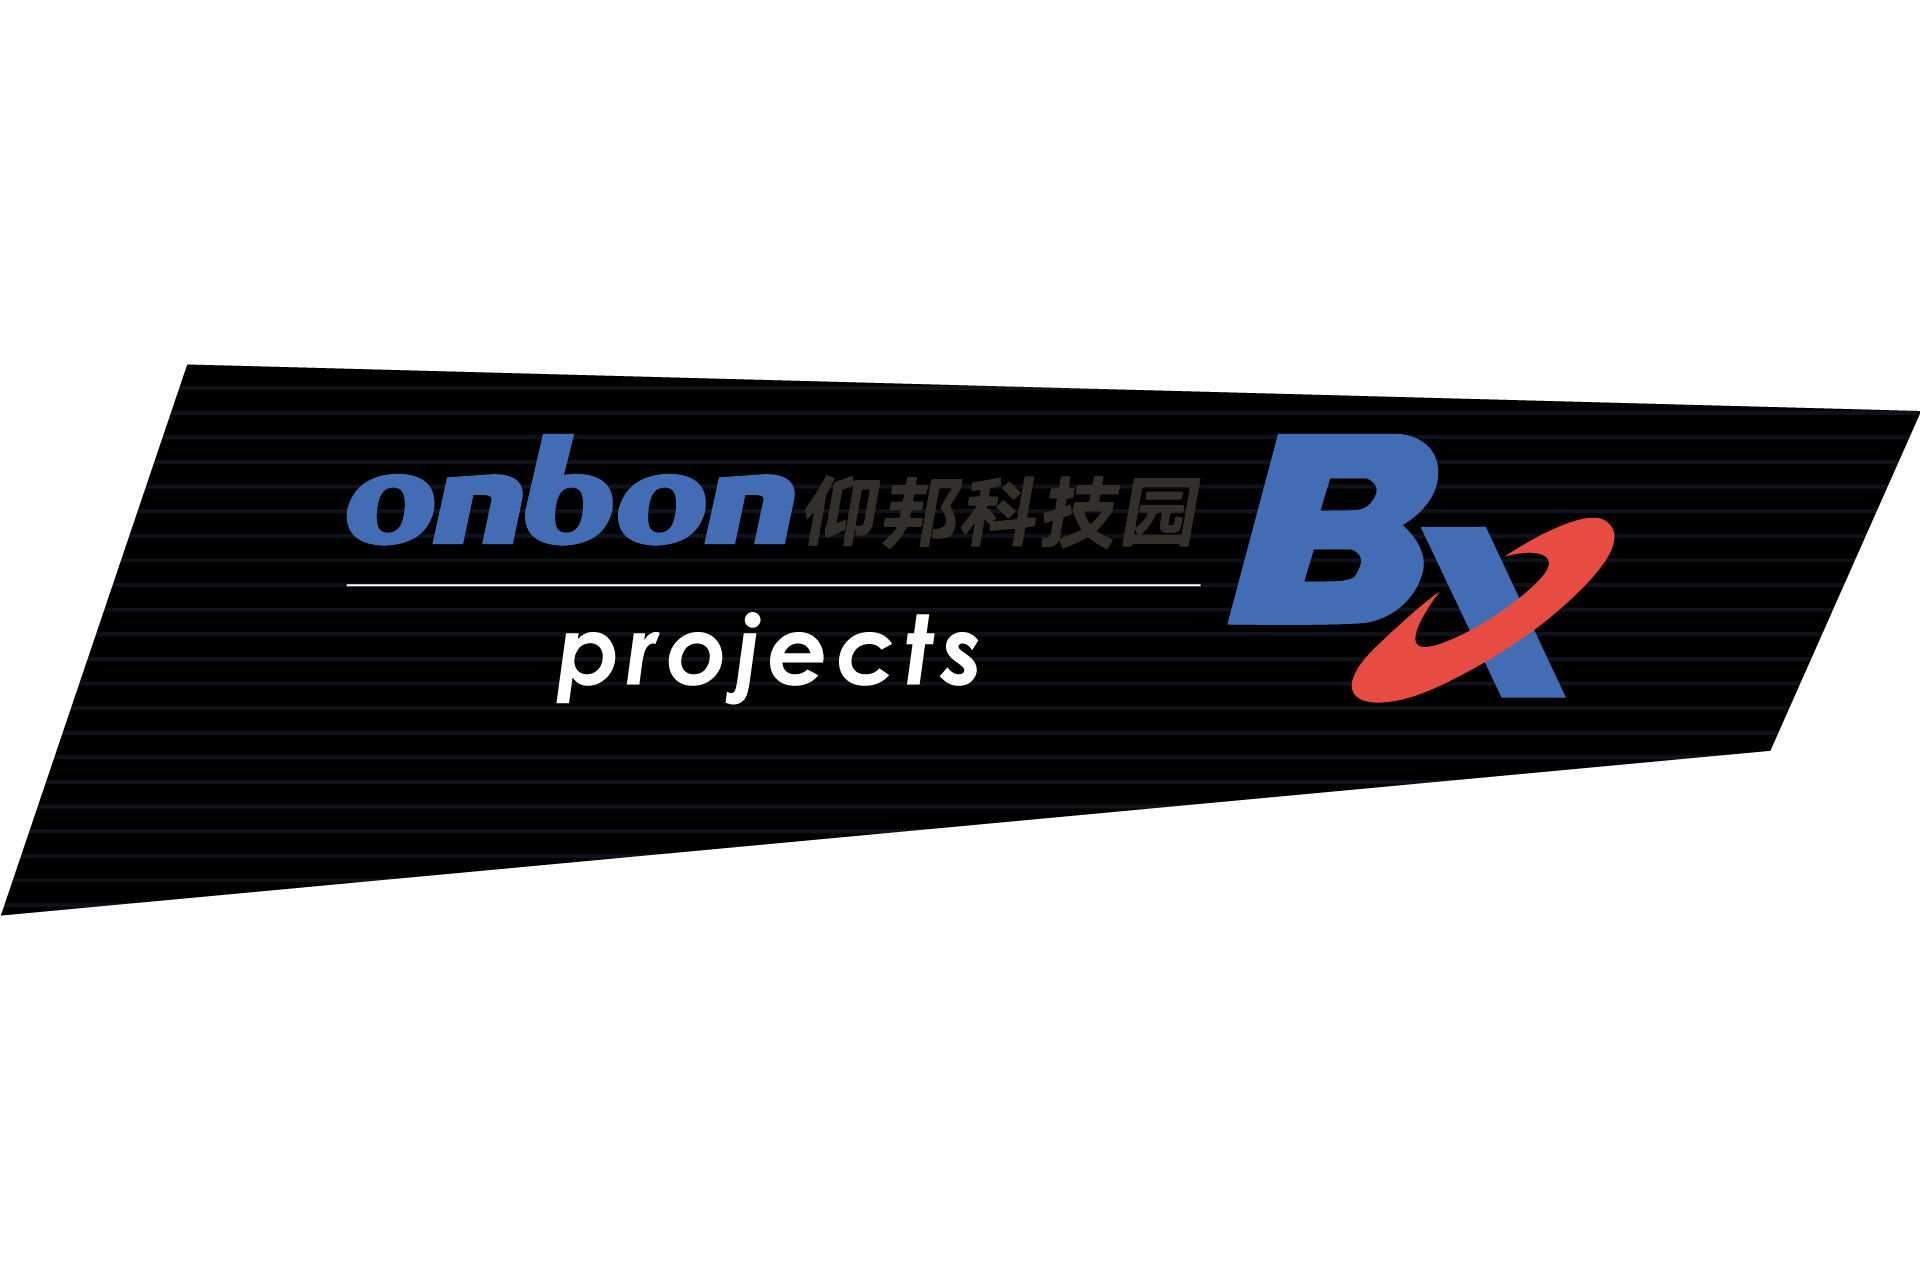 Onbon projects